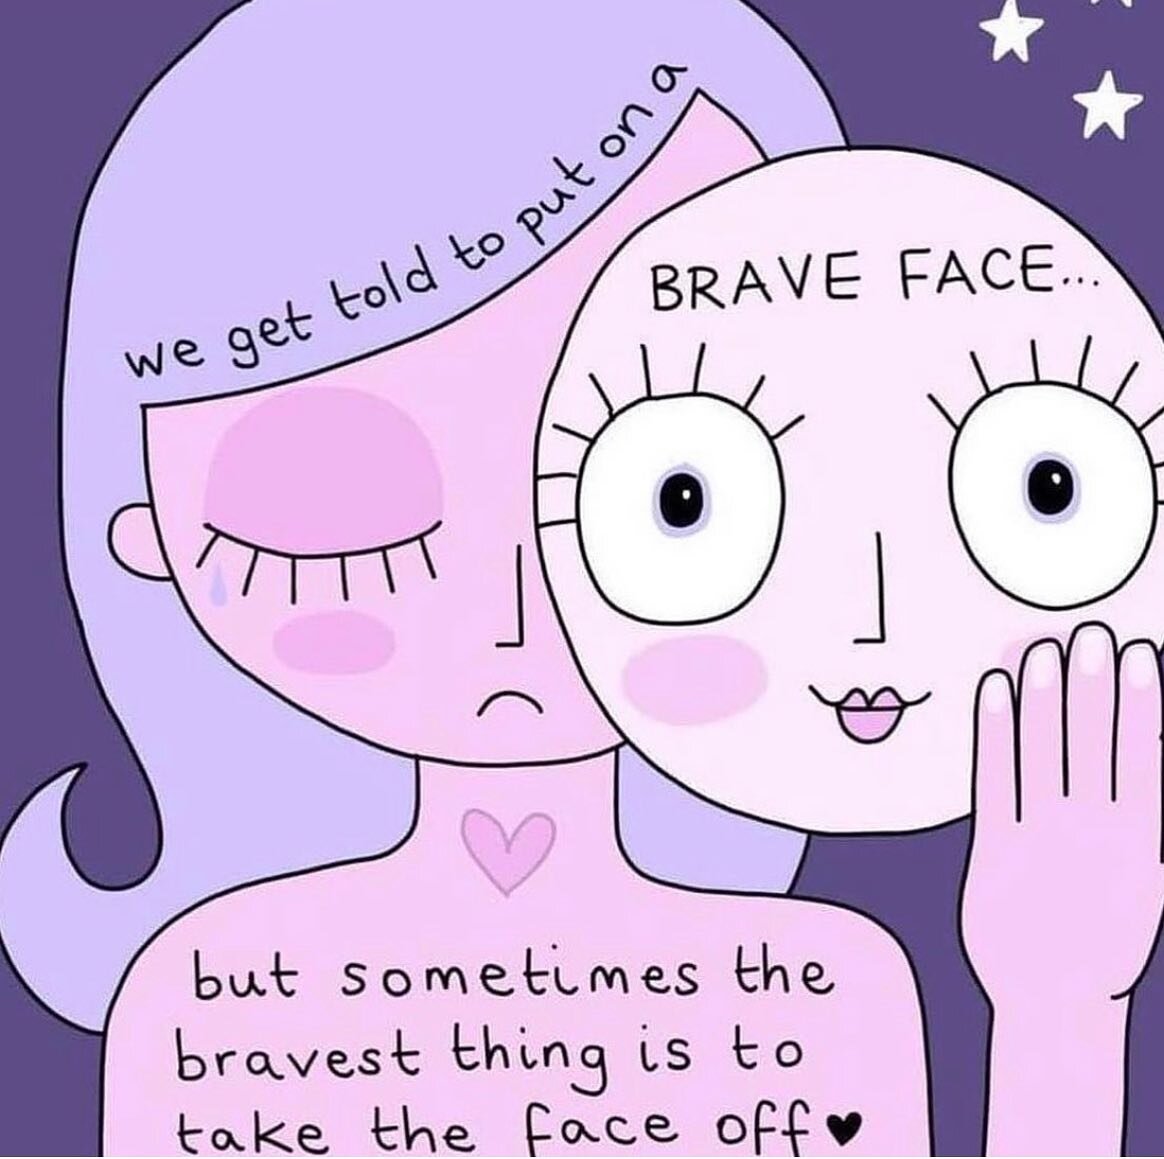 It&rsquo;s ok to not be ok but that doesn&rsquo;t mean you have to put up with feeling terrible. Take the brace face off. 
#worldmentalhealthday